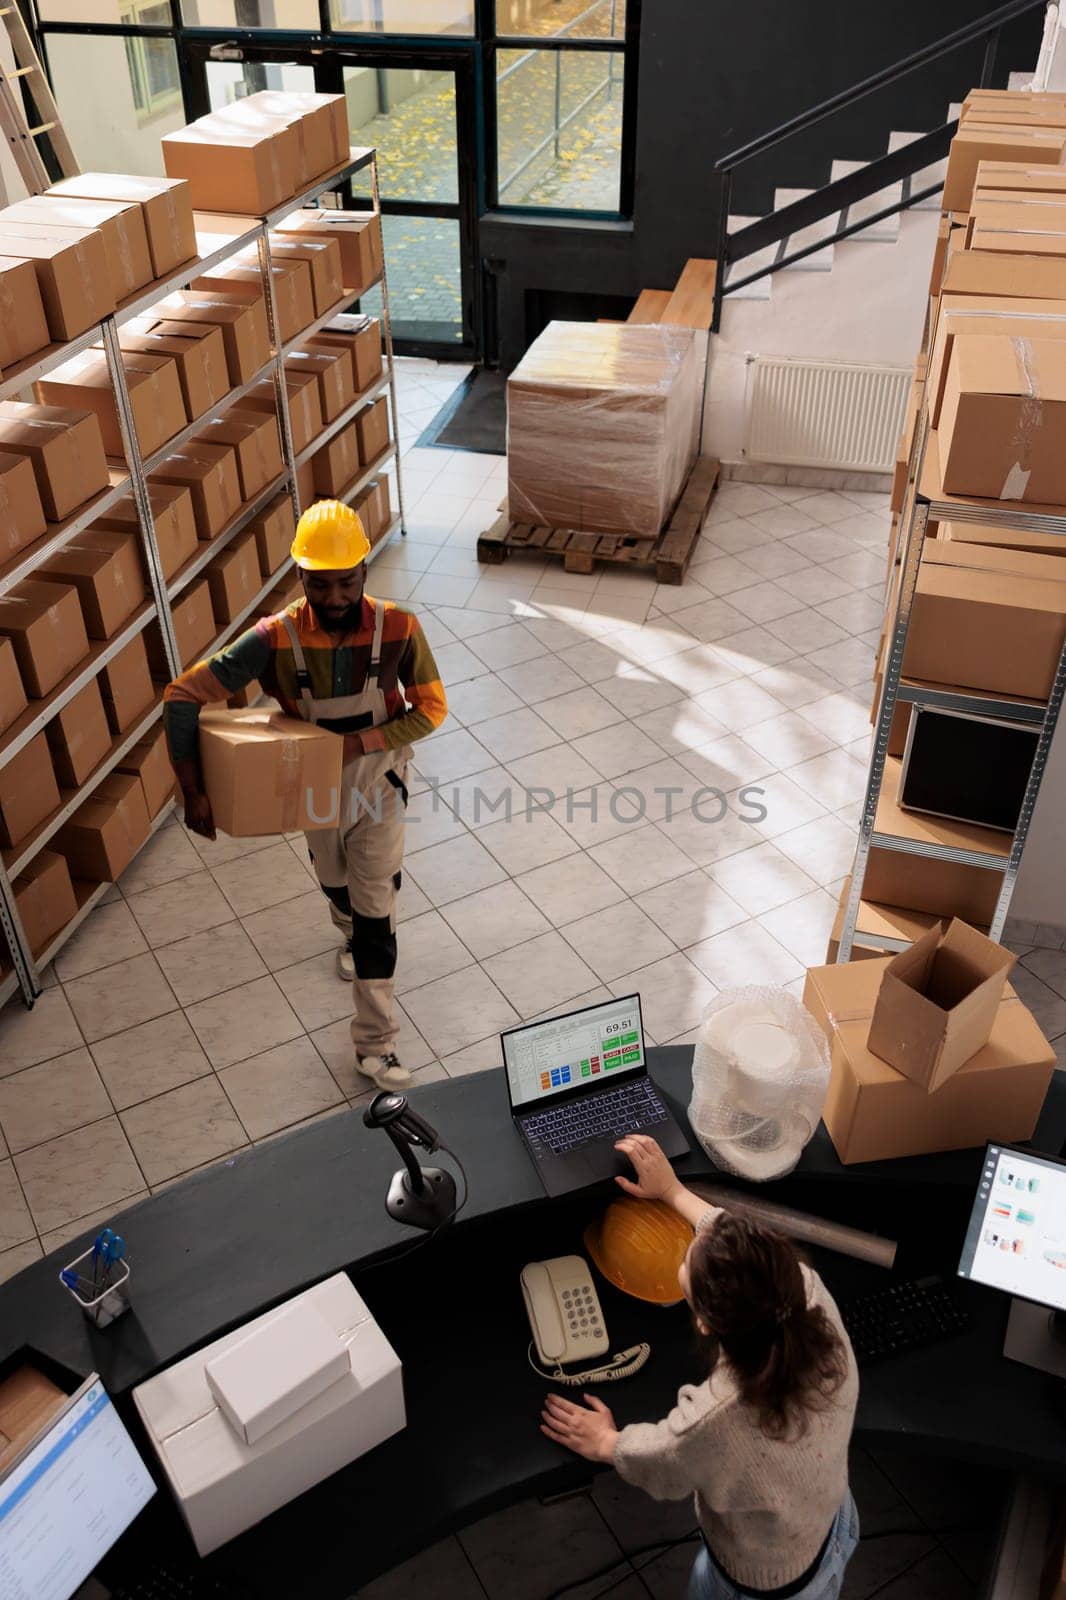 Top view of diverse employee working at products delivery by DCStudio